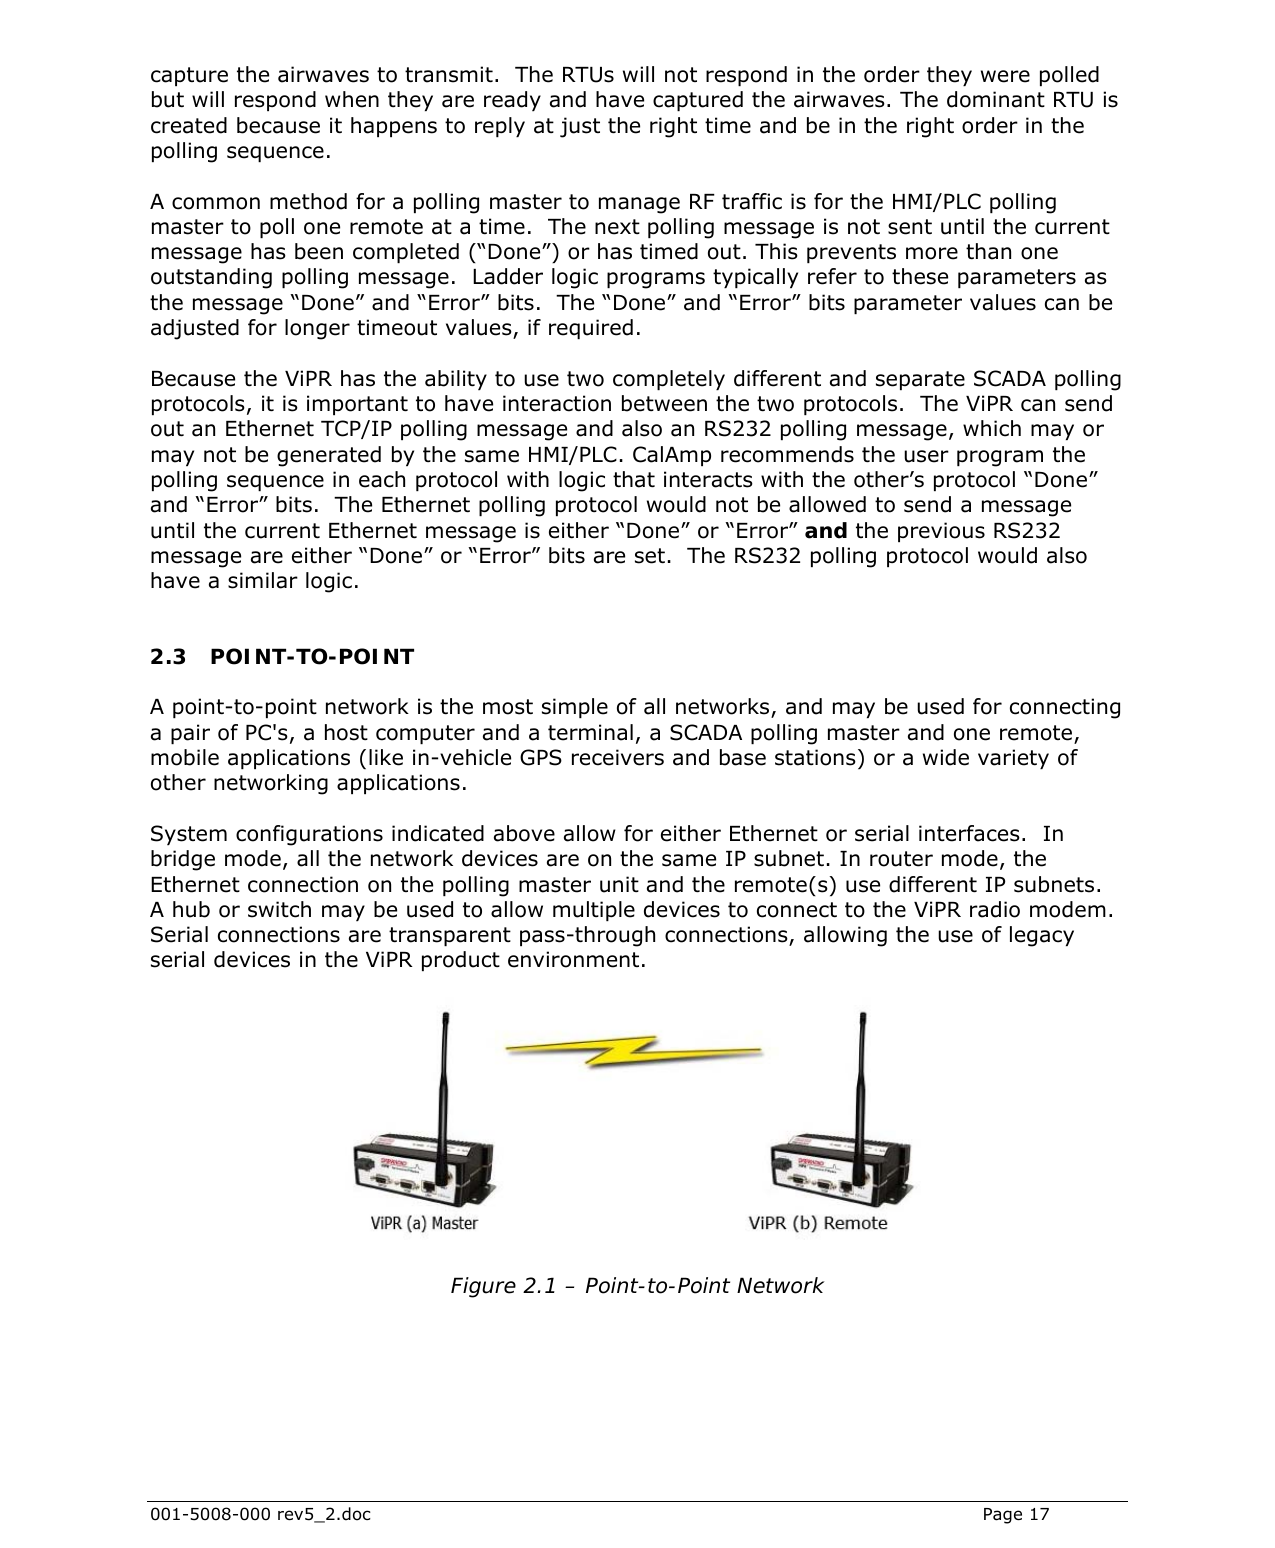  001-5008-000 rev5_2.doc    Page 17 capture the airwaves to transmit.  The RTUs will not respond in the order they were polled but will respond when they are ready and have captured the airwaves. The dominant RTU is created because it happens to reply at just the right time and be in the right order in the polling sequence.  A common method for a polling master to manage RF traffic is for the HMI/PLC polling master to poll one remote at a time.  The next polling message is not sent until the current message has been completed (“Done”) or has timed out. This prevents more than one outstanding polling message.  Ladder logic programs typically refer to these parameters as the message “Done” and “Error” bits.  The “Done” and “Error” bits parameter values can be adjusted for longer timeout values, if required.  Because the ViPR has the ability to use two completely different and separate SCADA polling protocols, it is important to have interaction between the two protocols.  The ViPR can send out an Ethernet TCP/IP polling message and also an RS232 polling message, which may or may not be generated by the same HMI/PLC. CalAmp recommends the user program the polling sequence in each protocol with logic that interacts with the other’s protocol “Done” and “Error” bits.  The Ethernet polling protocol would not be allowed to send a message until the current Ethernet message is either “Done” or “Error” and the previous RS232 message are either “Done” or “Error” bits are set.  The RS232 polling protocol would also have a similar logic.  2.3 POINT-TO-POINT A point-to-point network is the most simple of all networks, and may be used for connecting a pair of PC&apos;s, a host computer and a terminal, a SCADA polling master and one remote, mobile applications (like in-vehicle GPS receivers and base stations) or a wide variety of other networking applications.  System configurations indicated above allow for either Ethernet or serial interfaces.  In bridge mode, all the network devices are on the same IP subnet. In router mode, the Ethernet connection on the polling master unit and the remote(s) use different IP subnets.  A hub or switch may be used to allow multiple devices to connect to the ViPR radio modem.  Serial connections are transparent pass-through connections, allowing the use of legacy serial devices in the ViPR product environment.    Figure 2.1 – Point-to-Point Network  